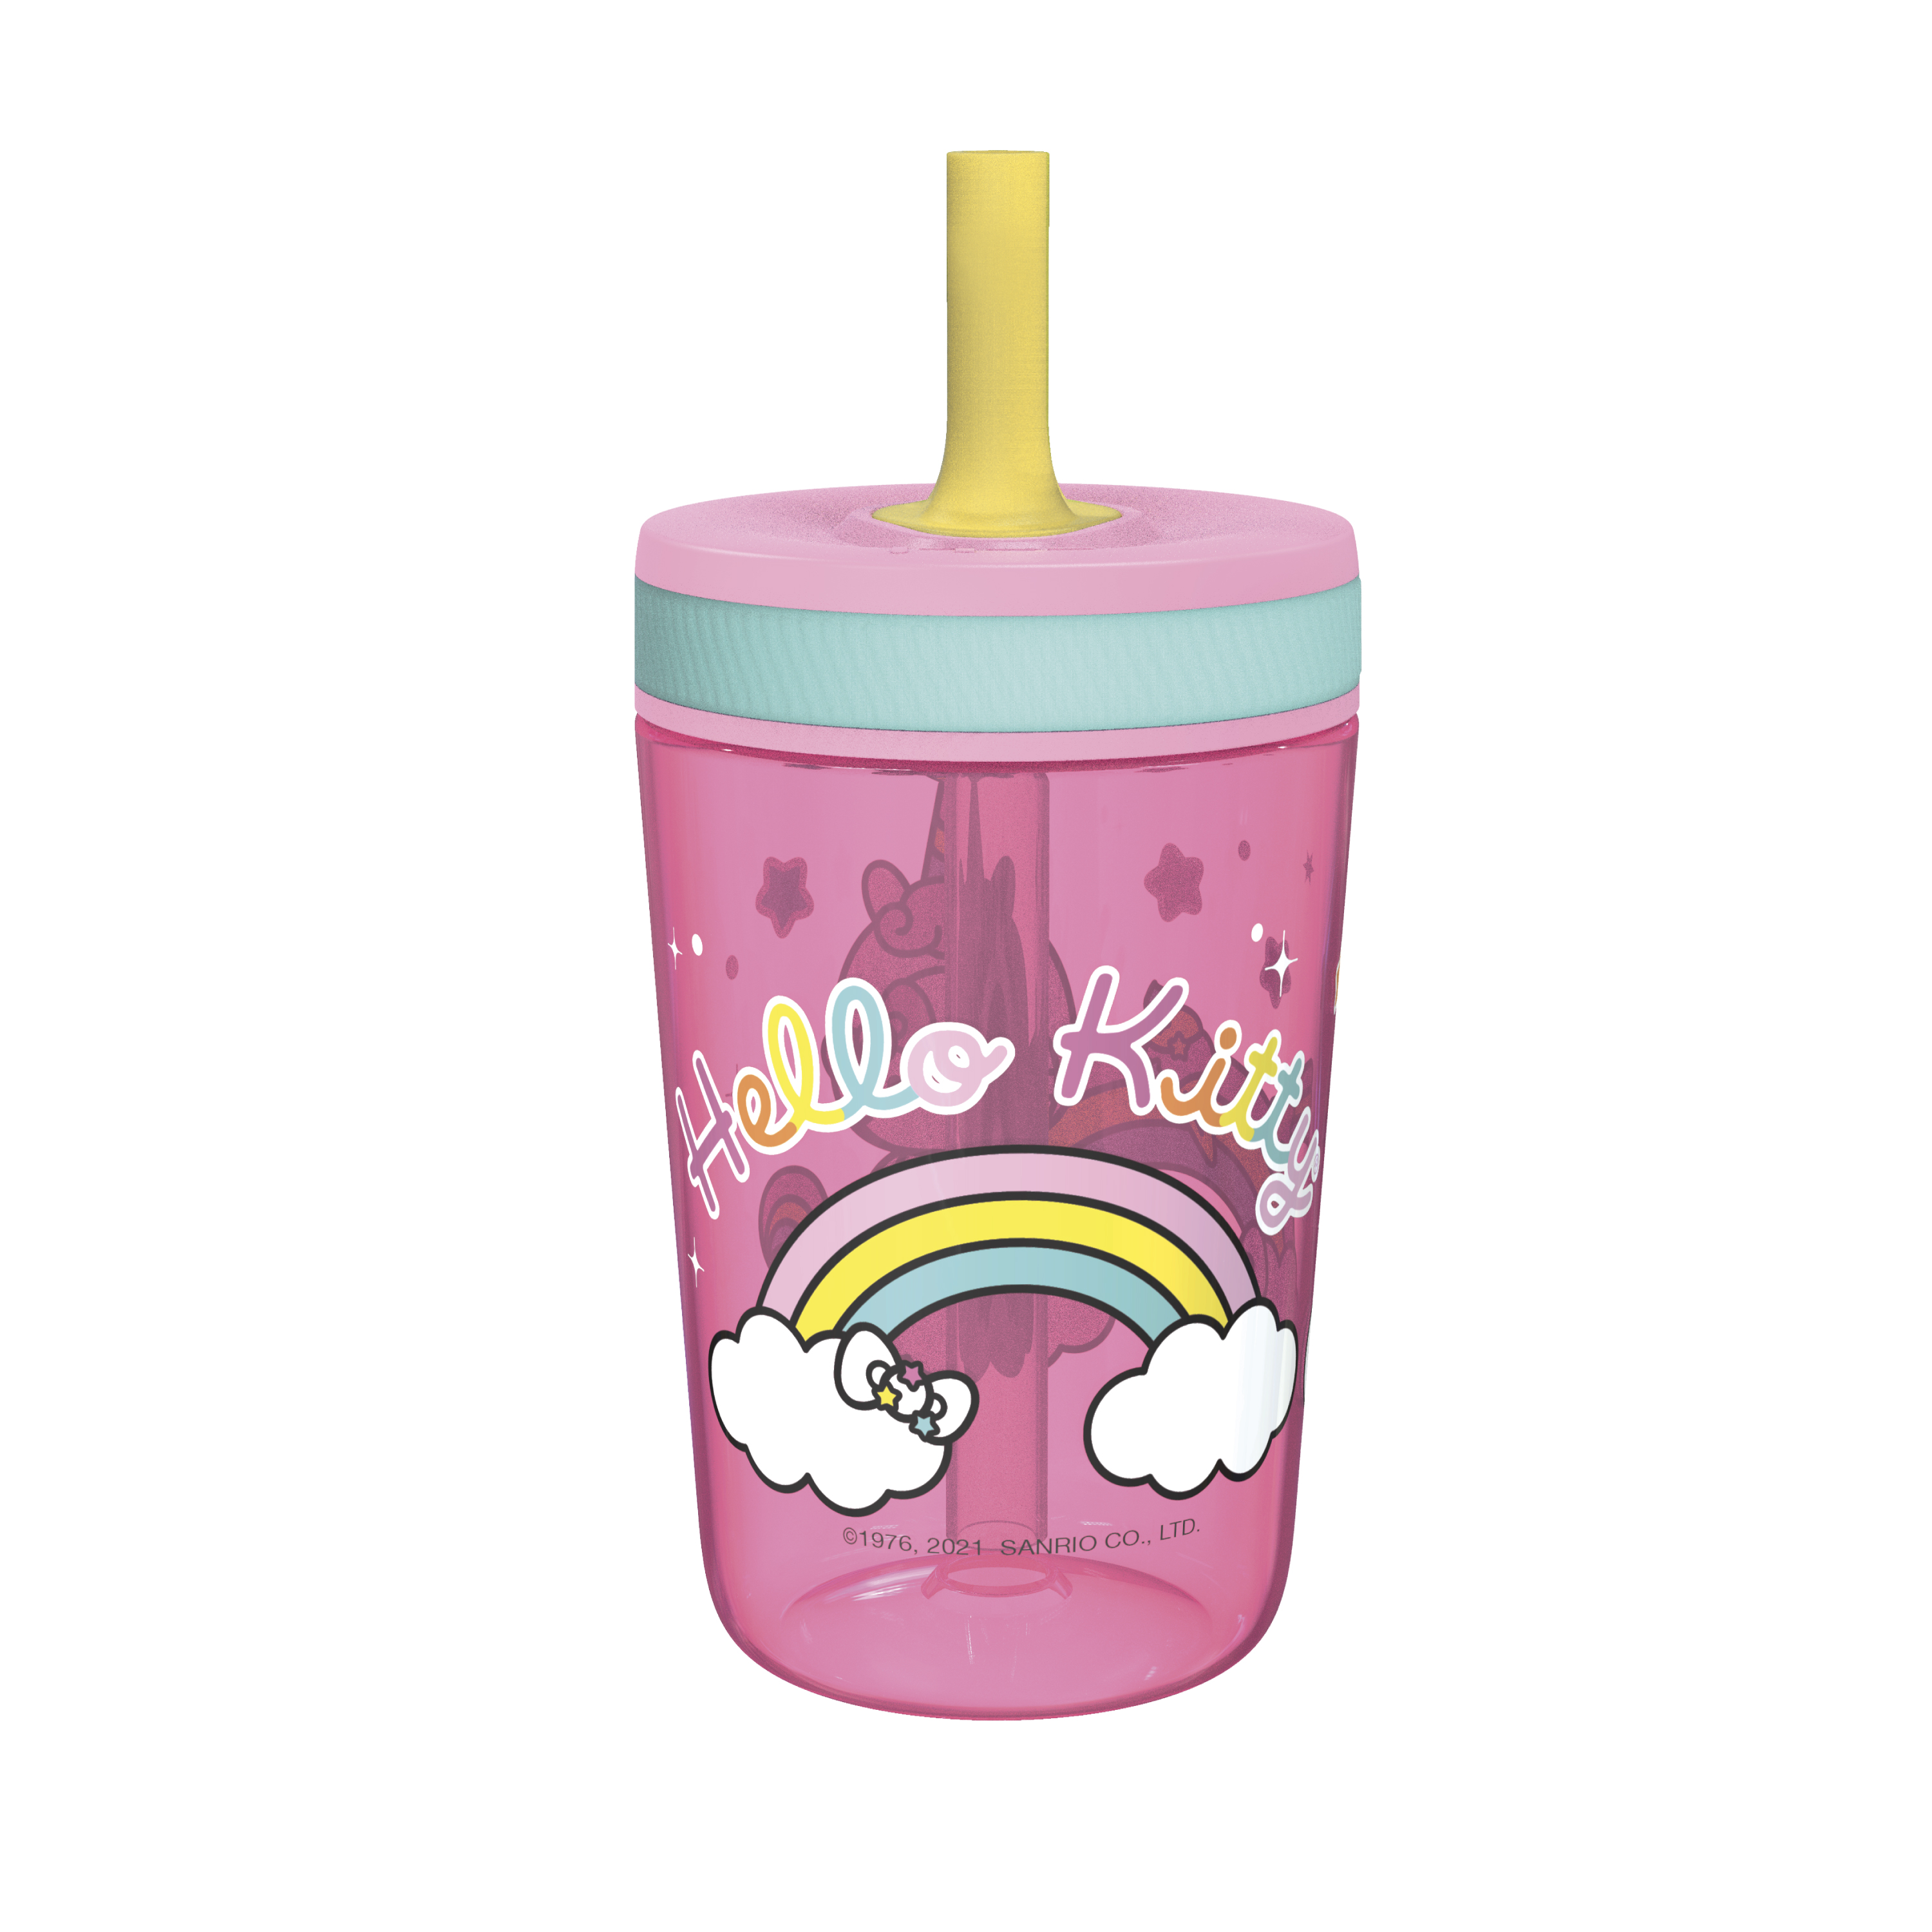 Sanrio 15  ounce Plastic Tumbler with Lid and Straw, Hello Kitty, 2-piece set slideshow image 5